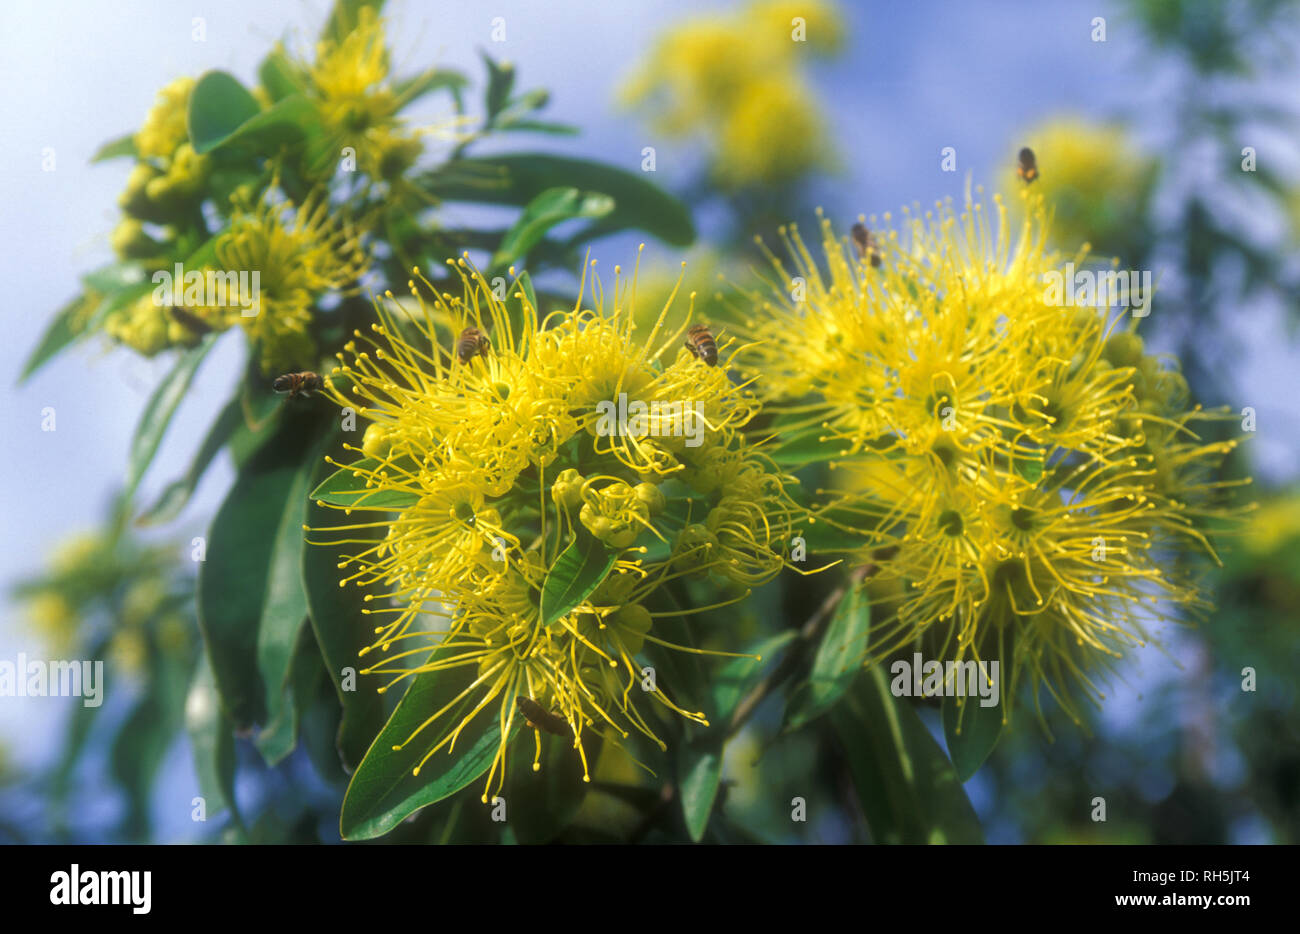 Xanthostemon chrysanthus, commonly named Golden Penda, is a species of tree in of the Myrtaceae family, endemic to North eastern Queensland, Australia. Stock Photo